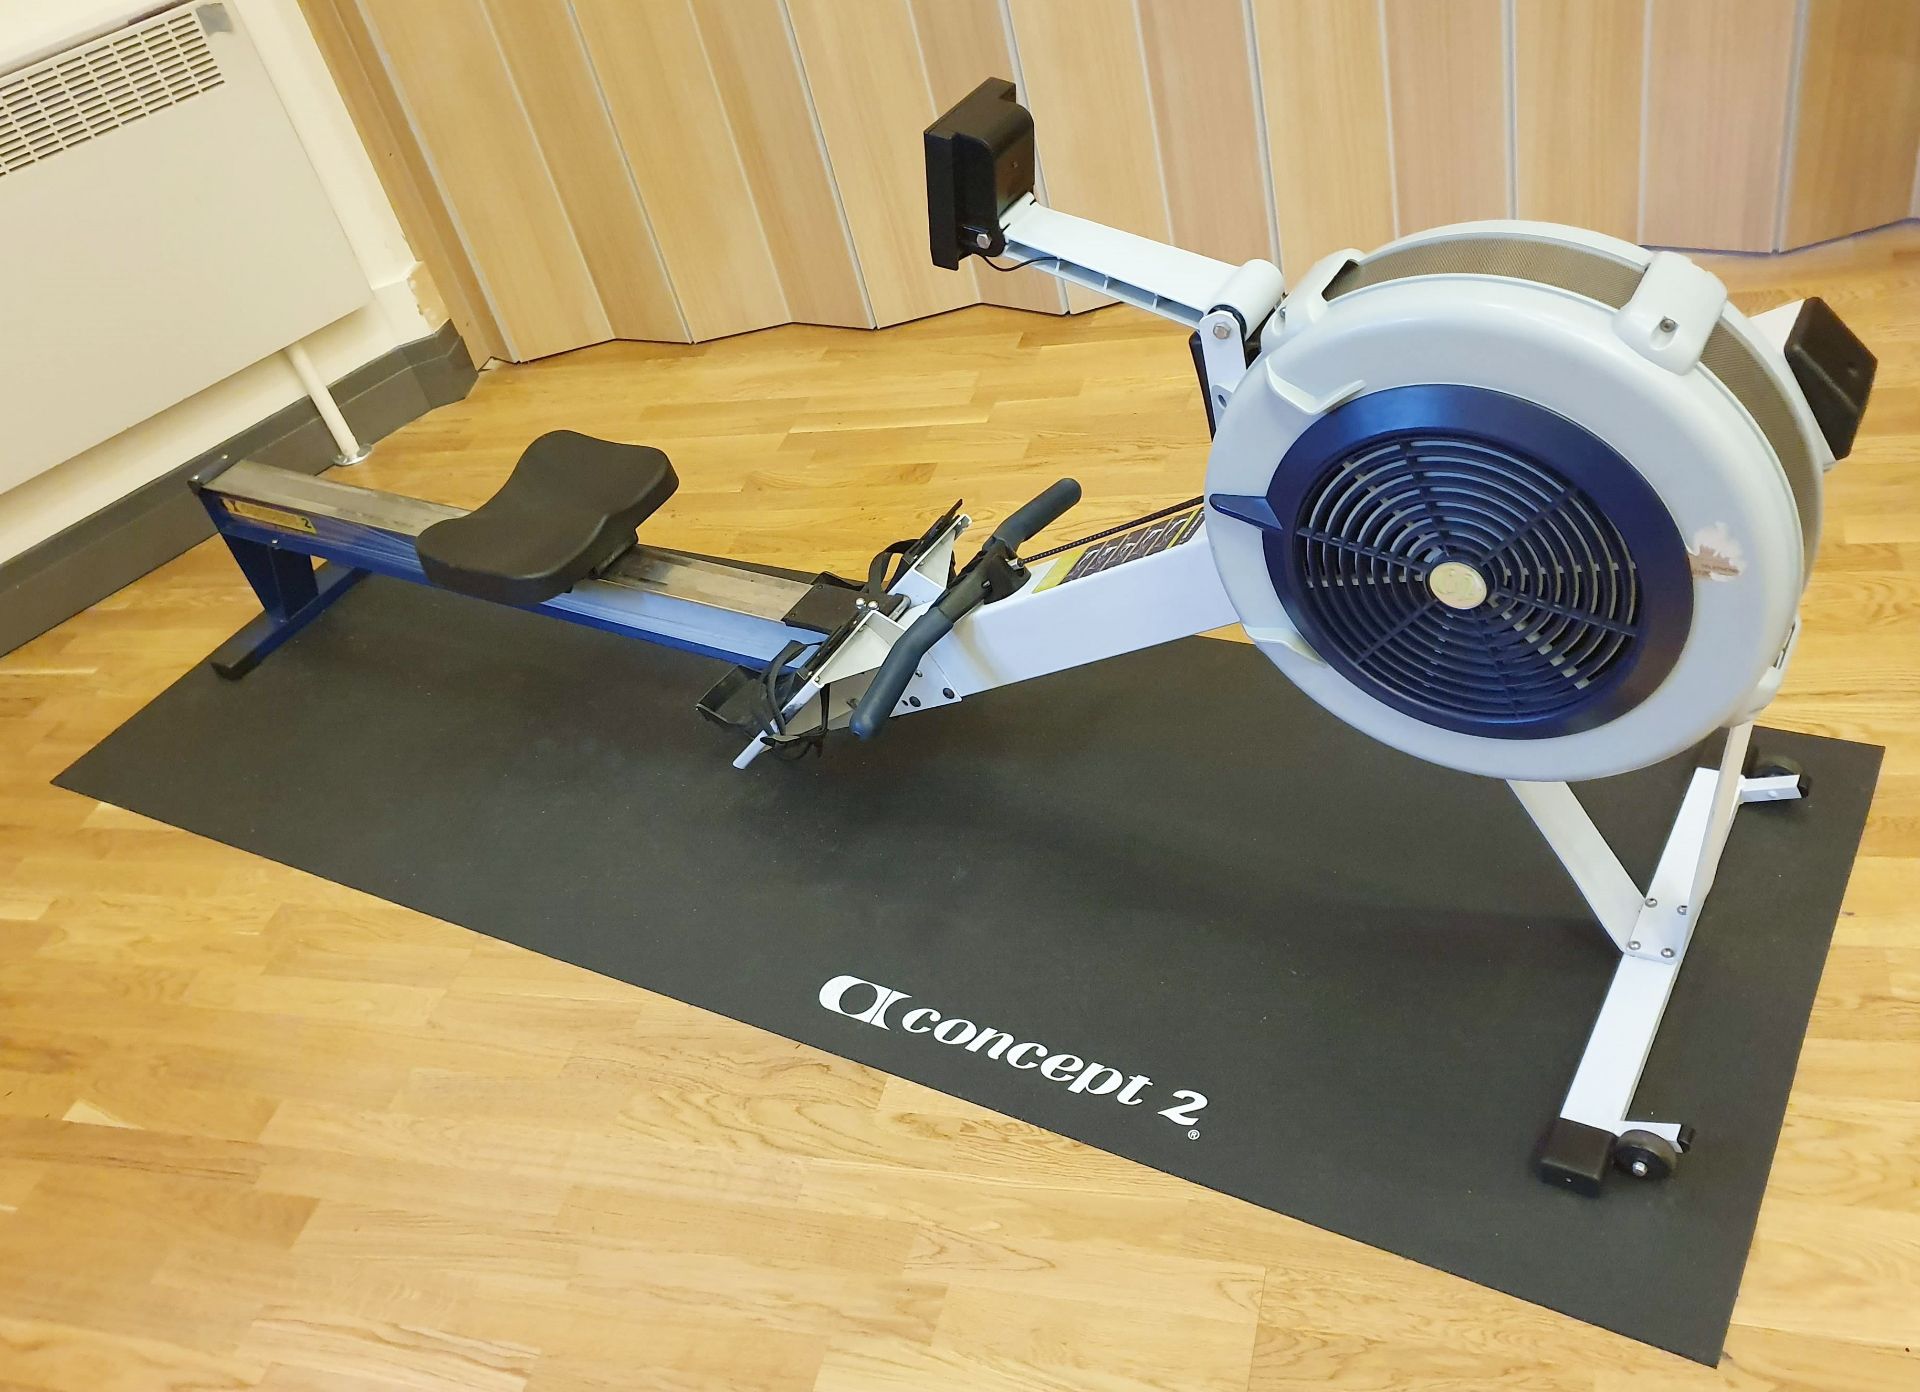 1 x Concept 2 Indoor Rowing Machine With PM3 Performance Monitor and Anti Slip Mat - CL552 -